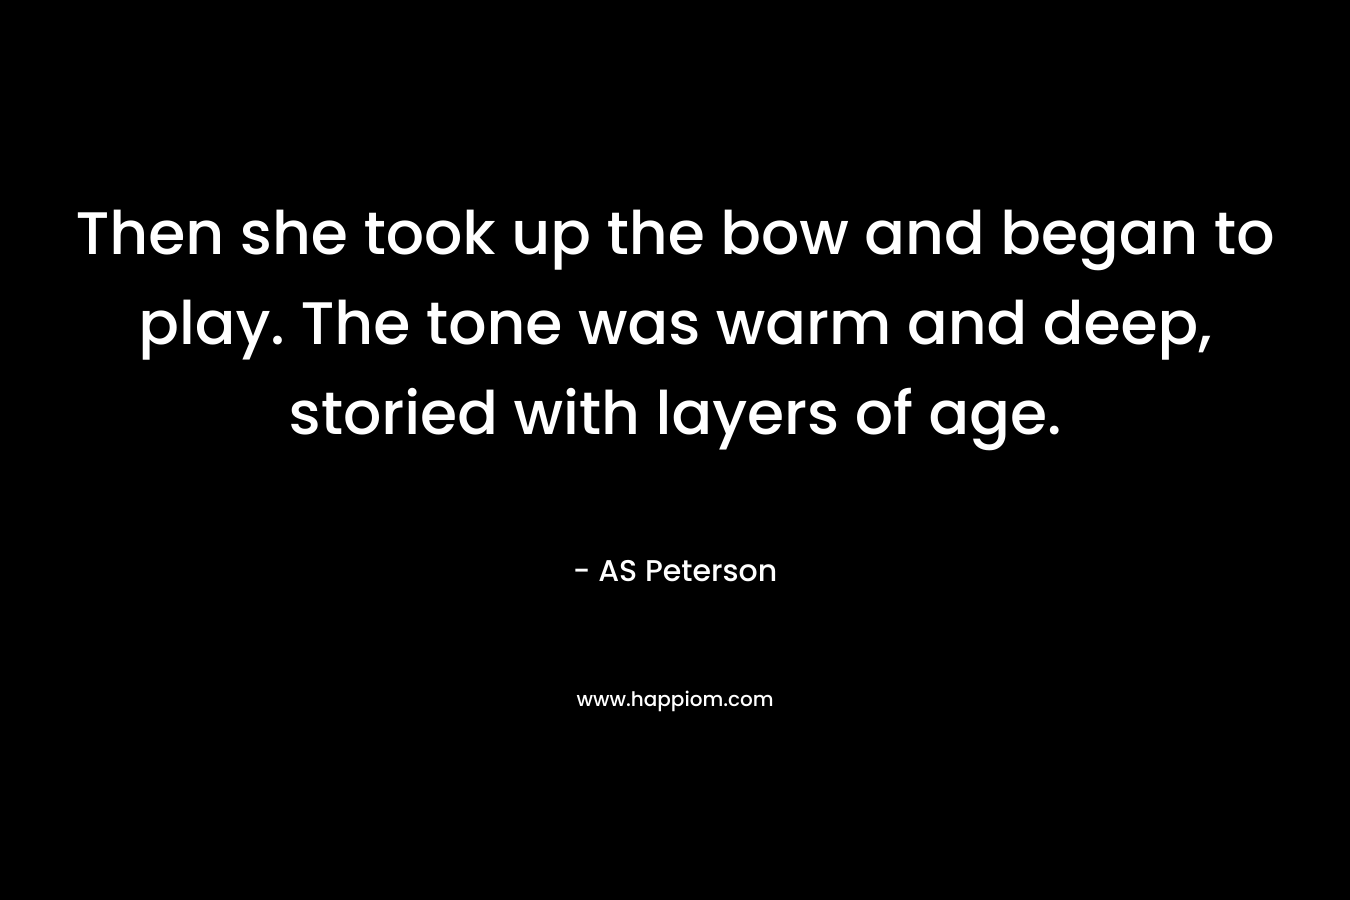 Then she took up the bow and began to play. The tone was warm and deep, storied with layers of age. – AS Peterson